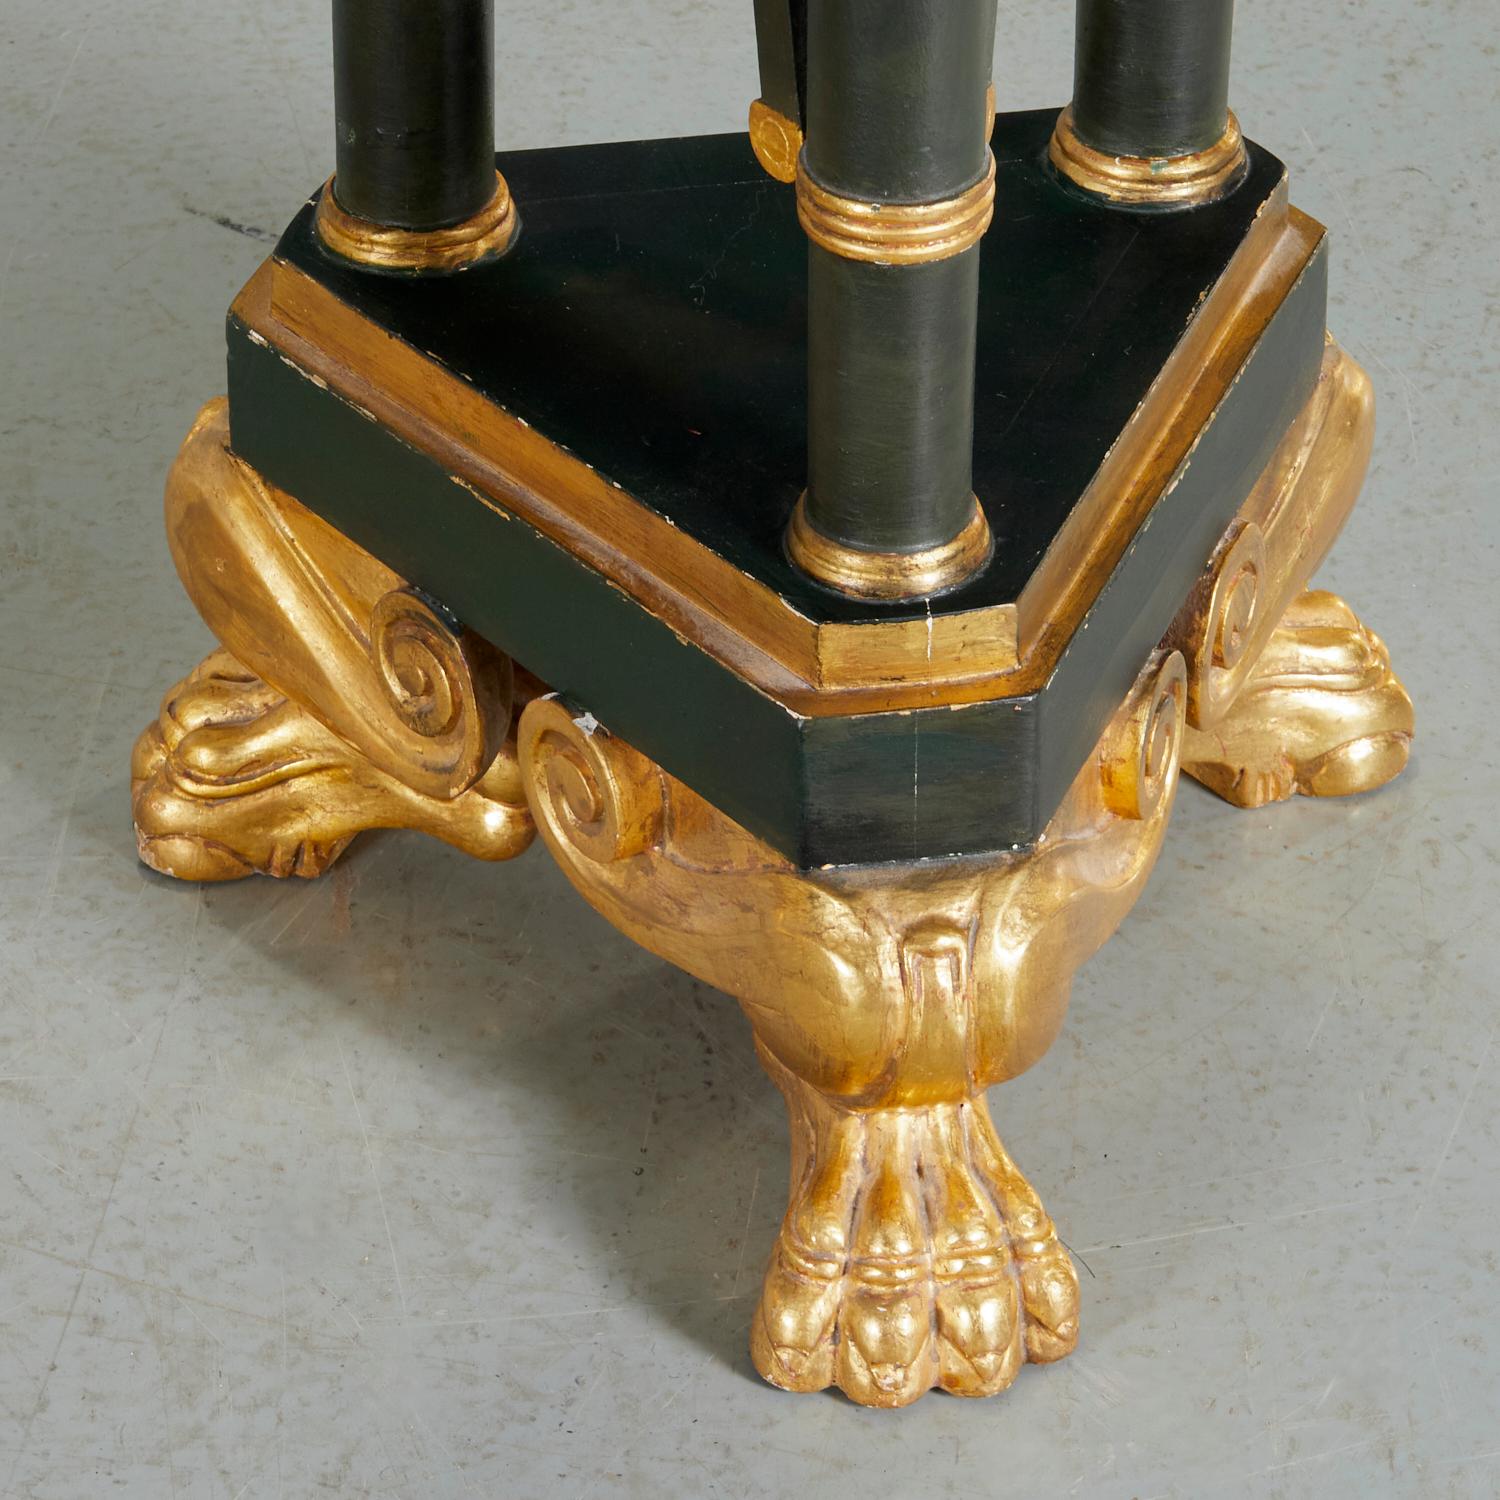 20th Century Vintage Empire Style Ebonised and Giltwood Torchiere Pedestals, a Pair For Sale